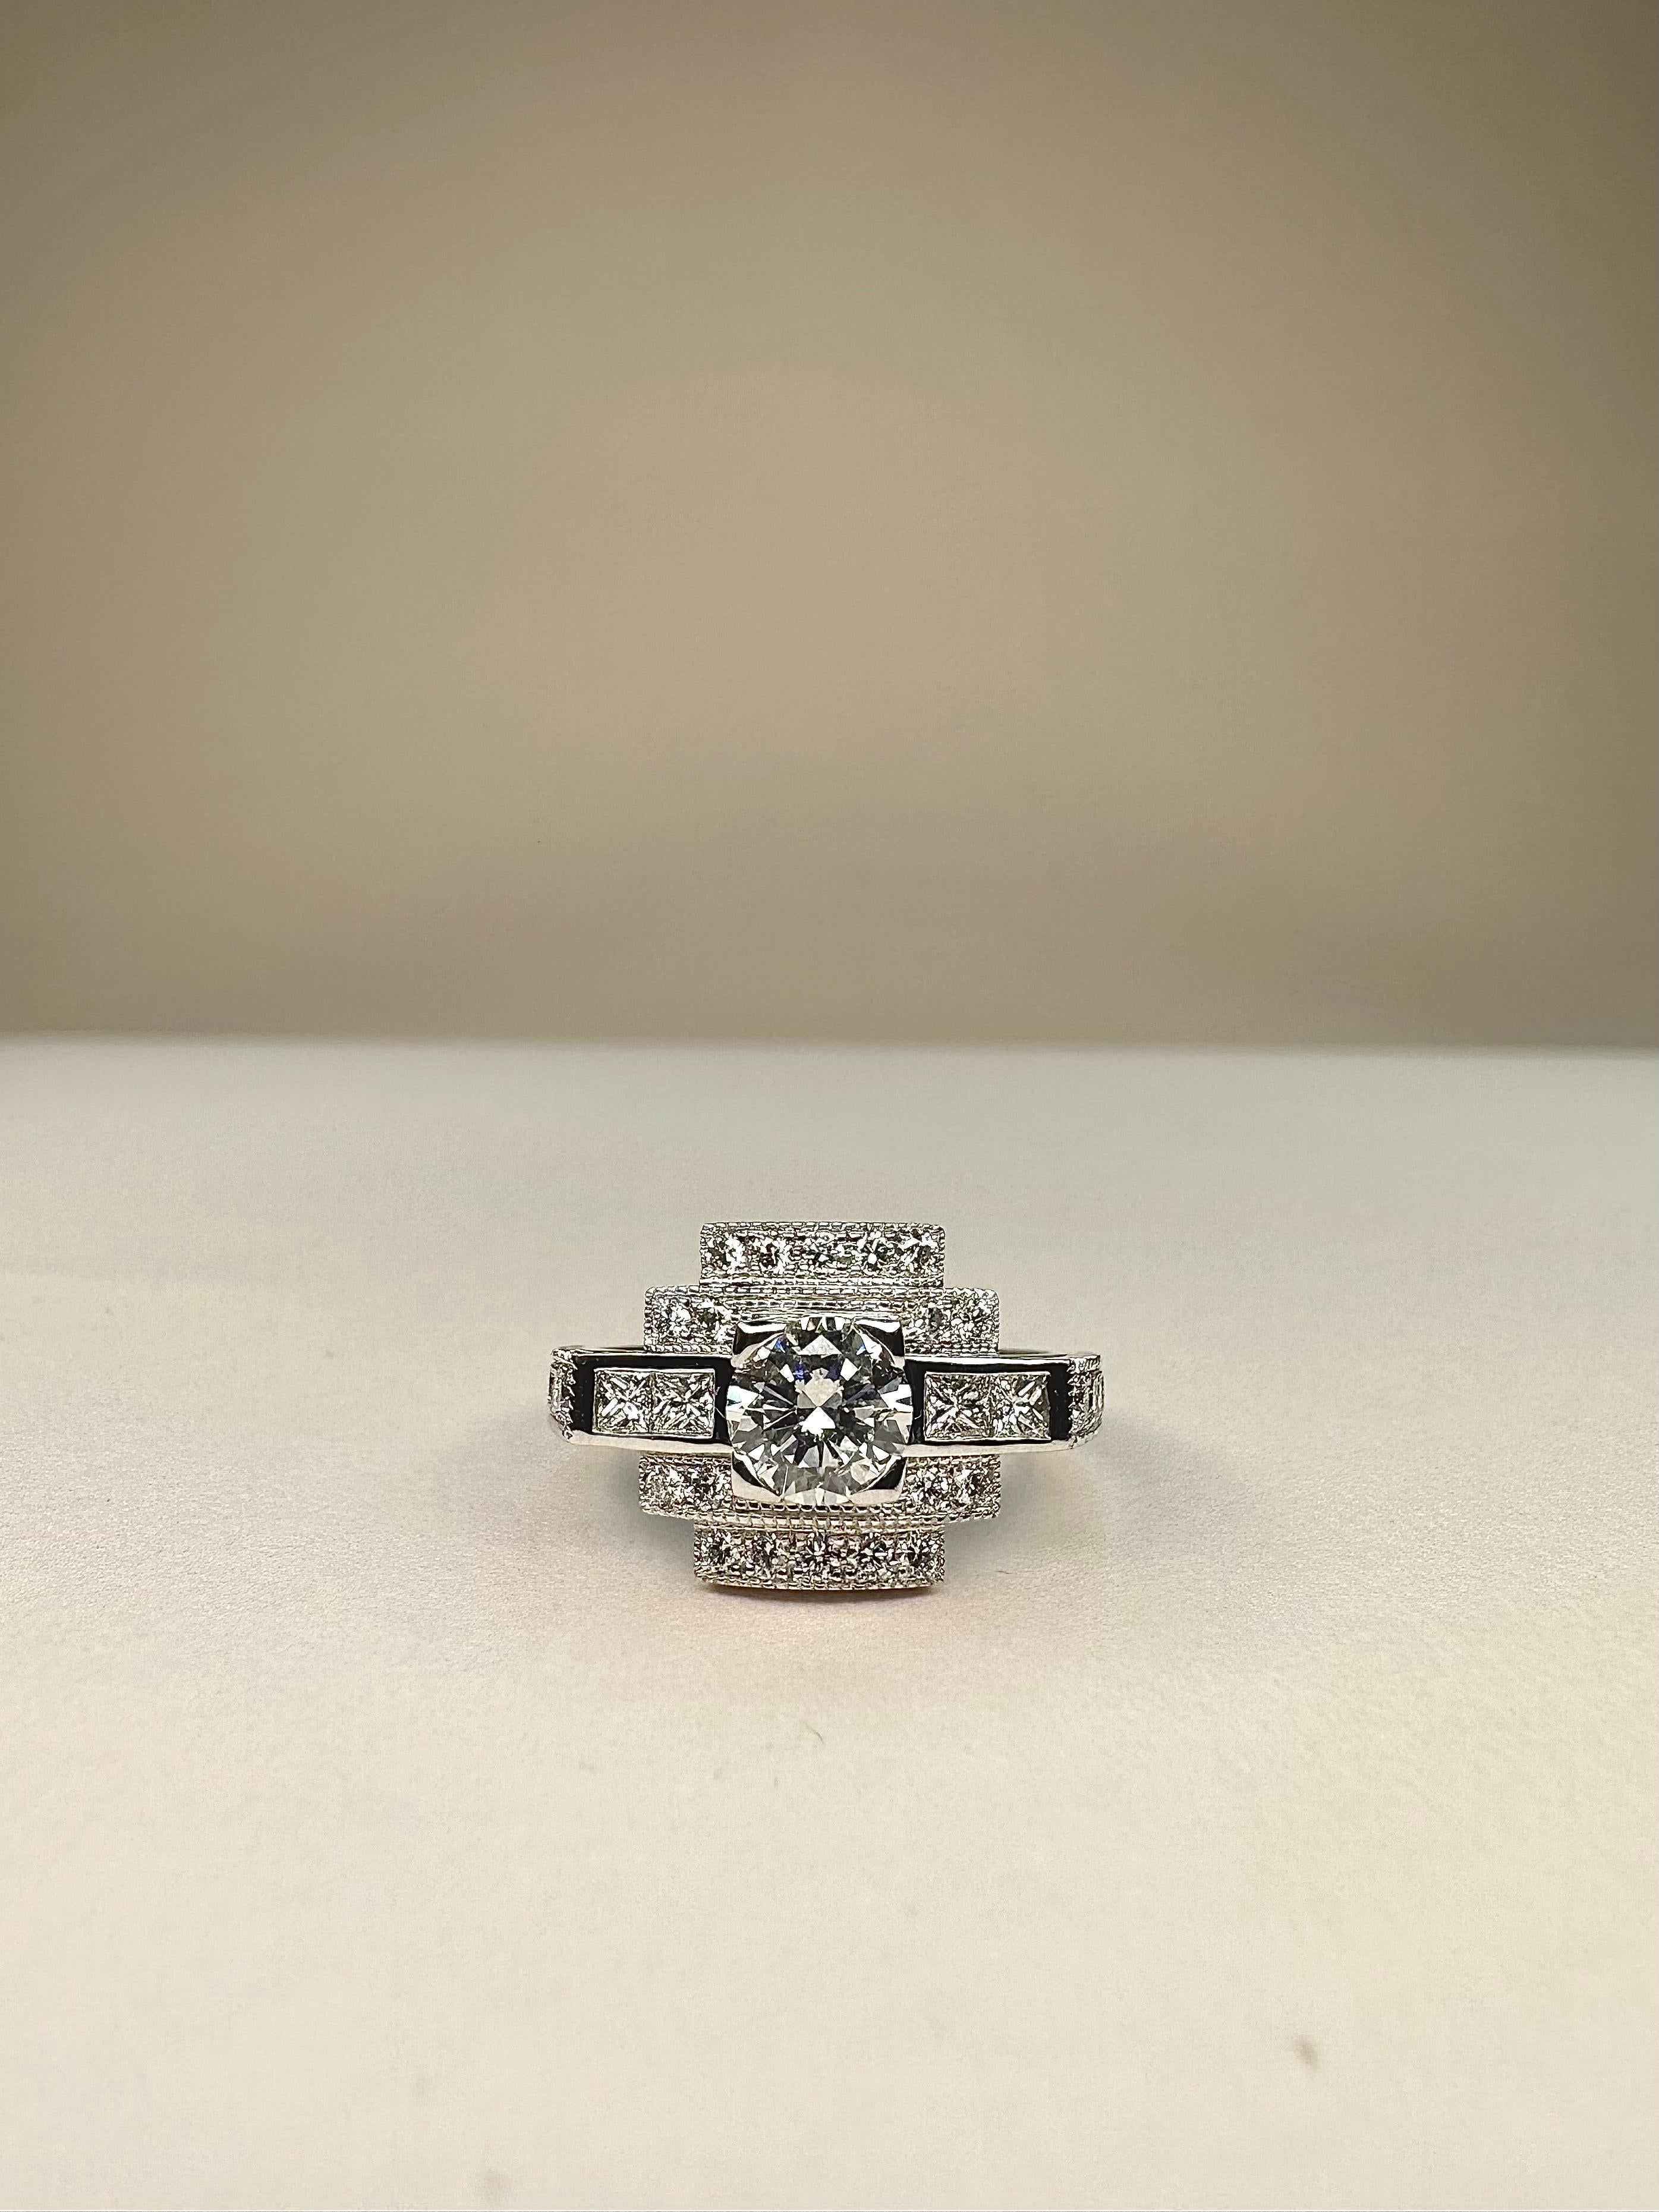 For Sale:  18k White Gold 0.7 Ct Diamond Art Deco Ring set with 0, 65 Cts of Diamonds 2